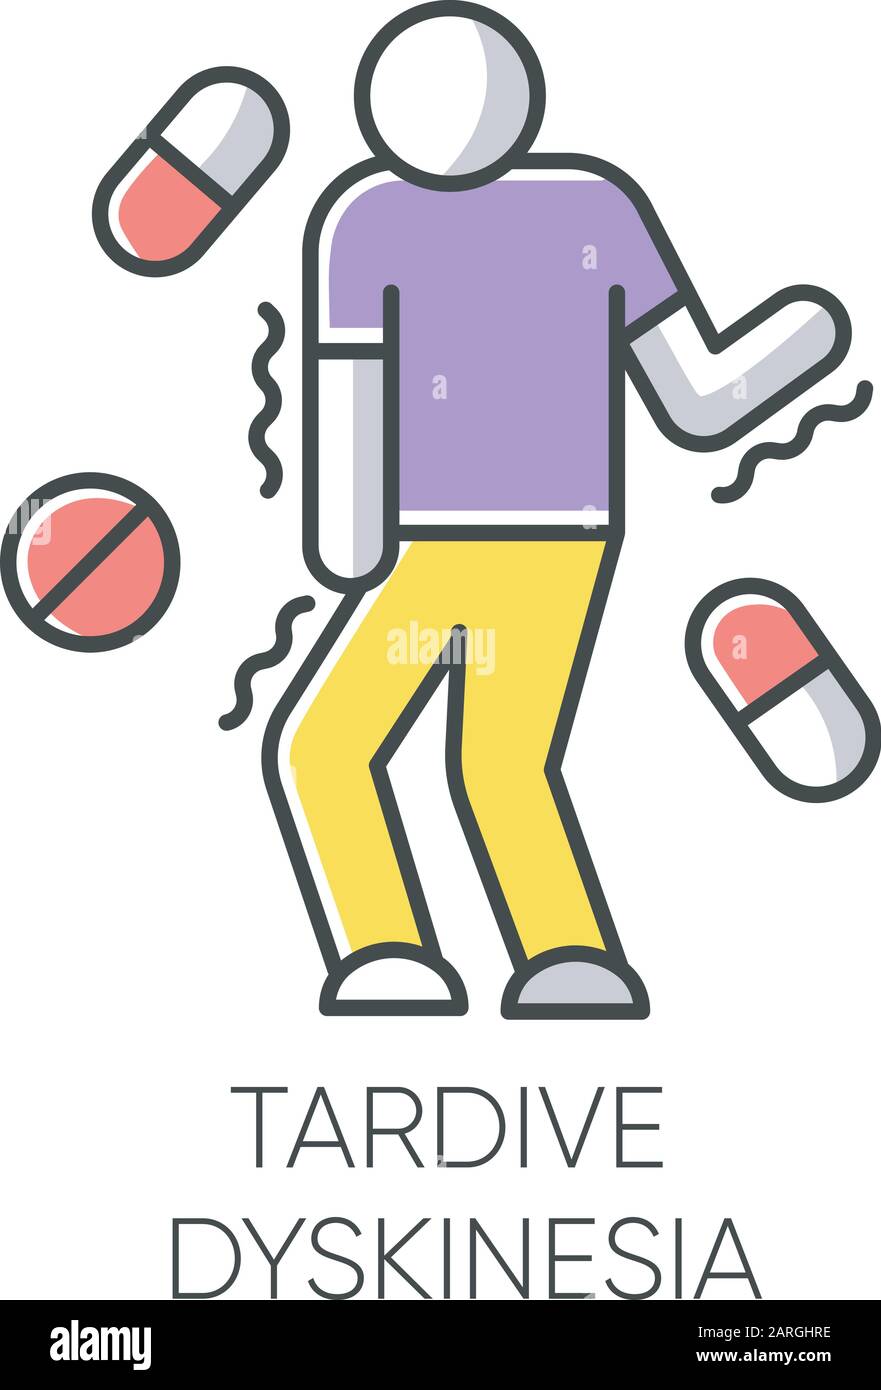 Tardive dyskinesia color icon. Tremor from medication. Movement problem from neuroleptics. Chorea, athetosis. Mental disorder. Neurological disease fr Stock Vector